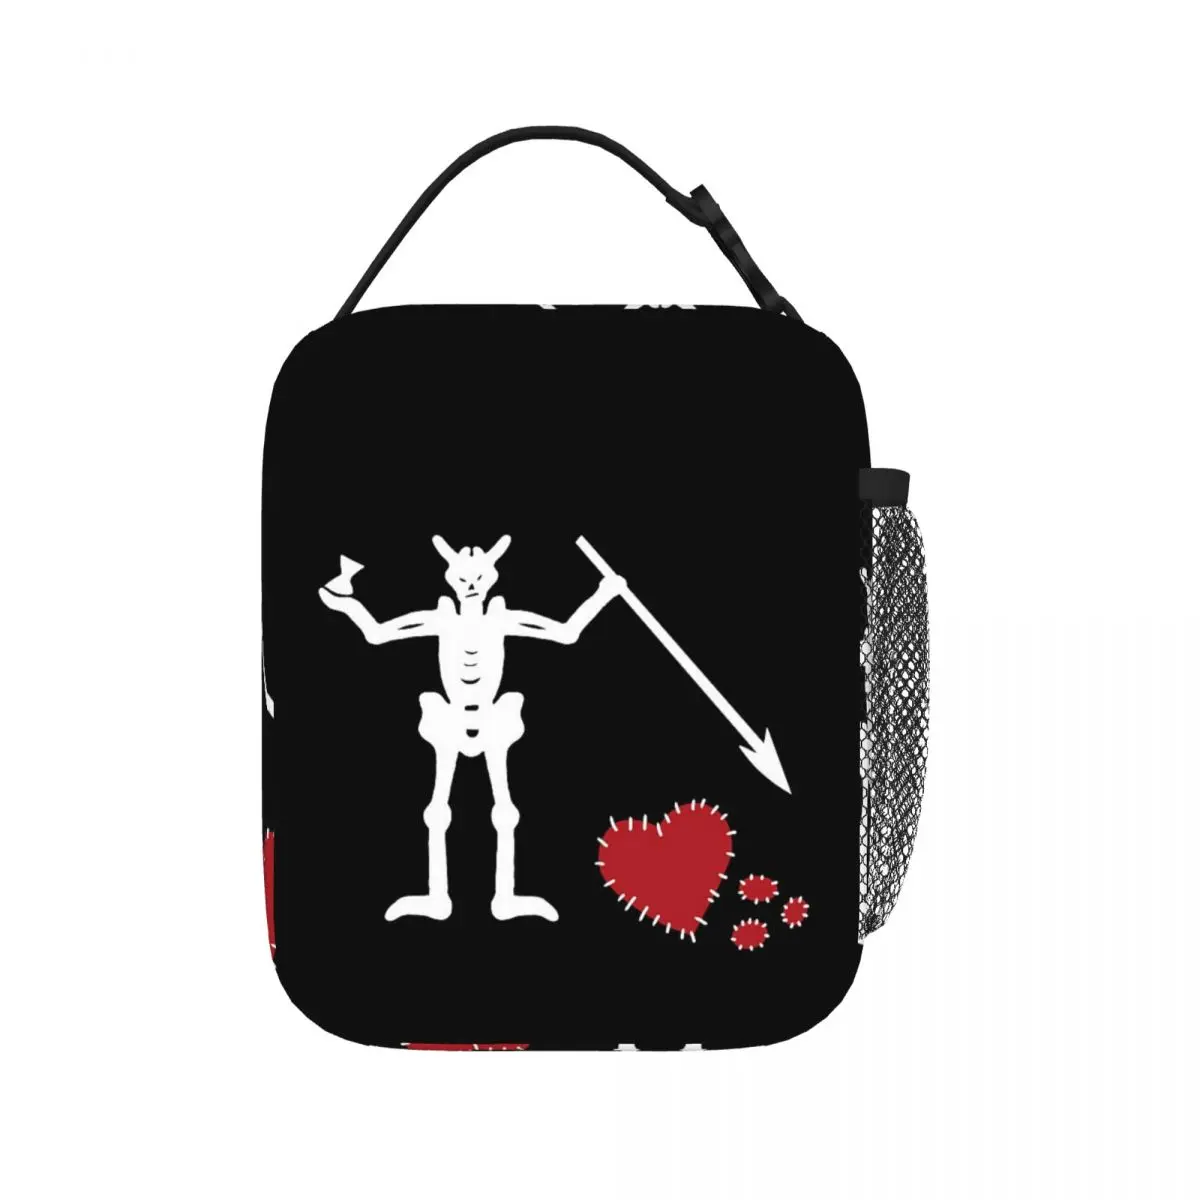 

Broken Hearted Blackbeard's Flag Insulated Lunch Bags Picnic Bags Thermal Cooler Lunch Box Lunch Tote for Woman Children School